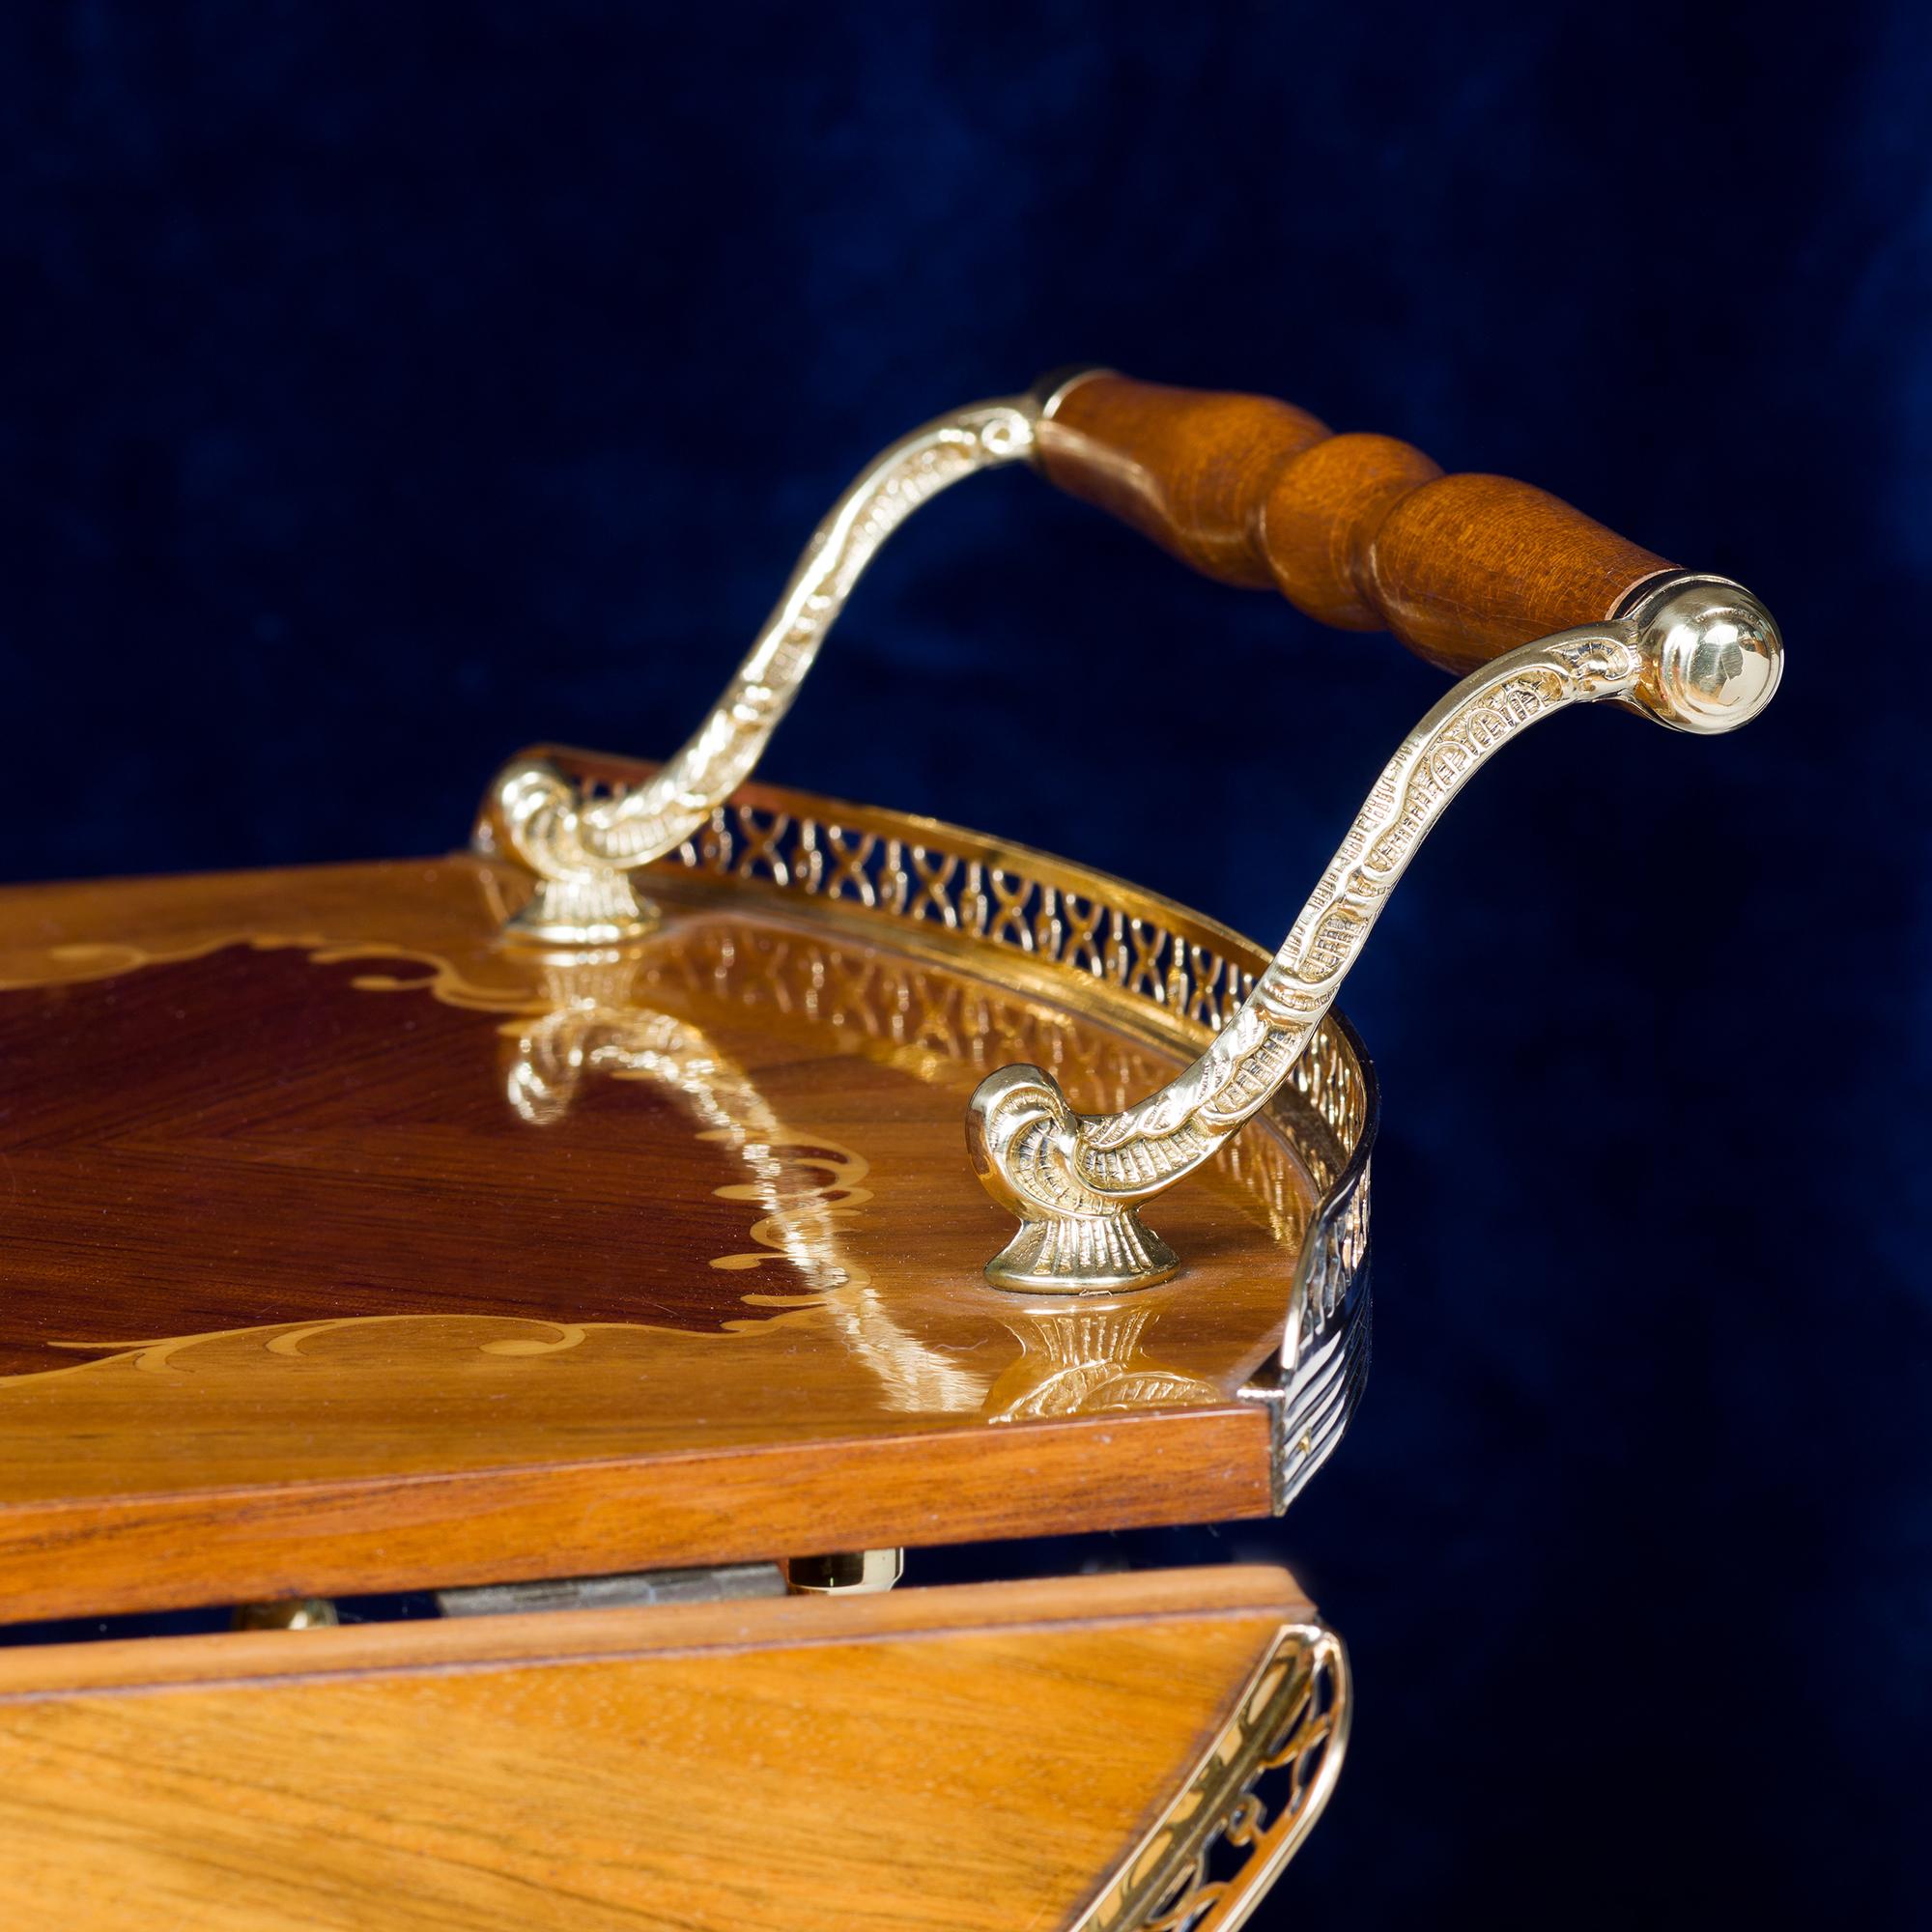 Mid-20th-century polished brass drop leaf bar cart with hand-turned wheels and supports, marquetry tops to top and bottom with triple bottle holders.
Italy, circa 1950

Height of handle 70.5cm
Height of tray 62cm
Length of Trolley 86cm
Length